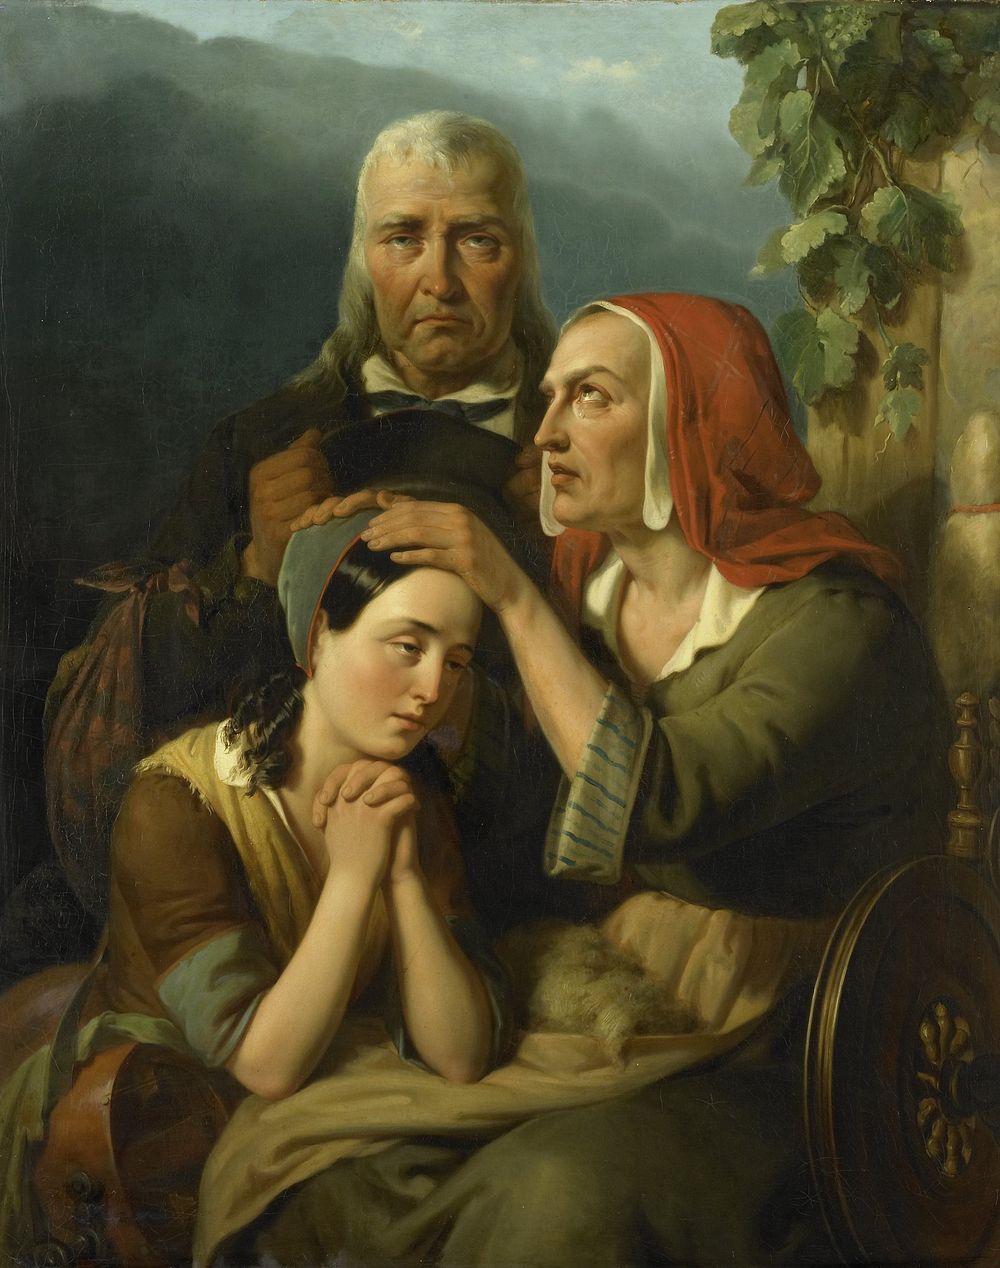 'A Mother's Blessing' (1844) by Moritz Calisch